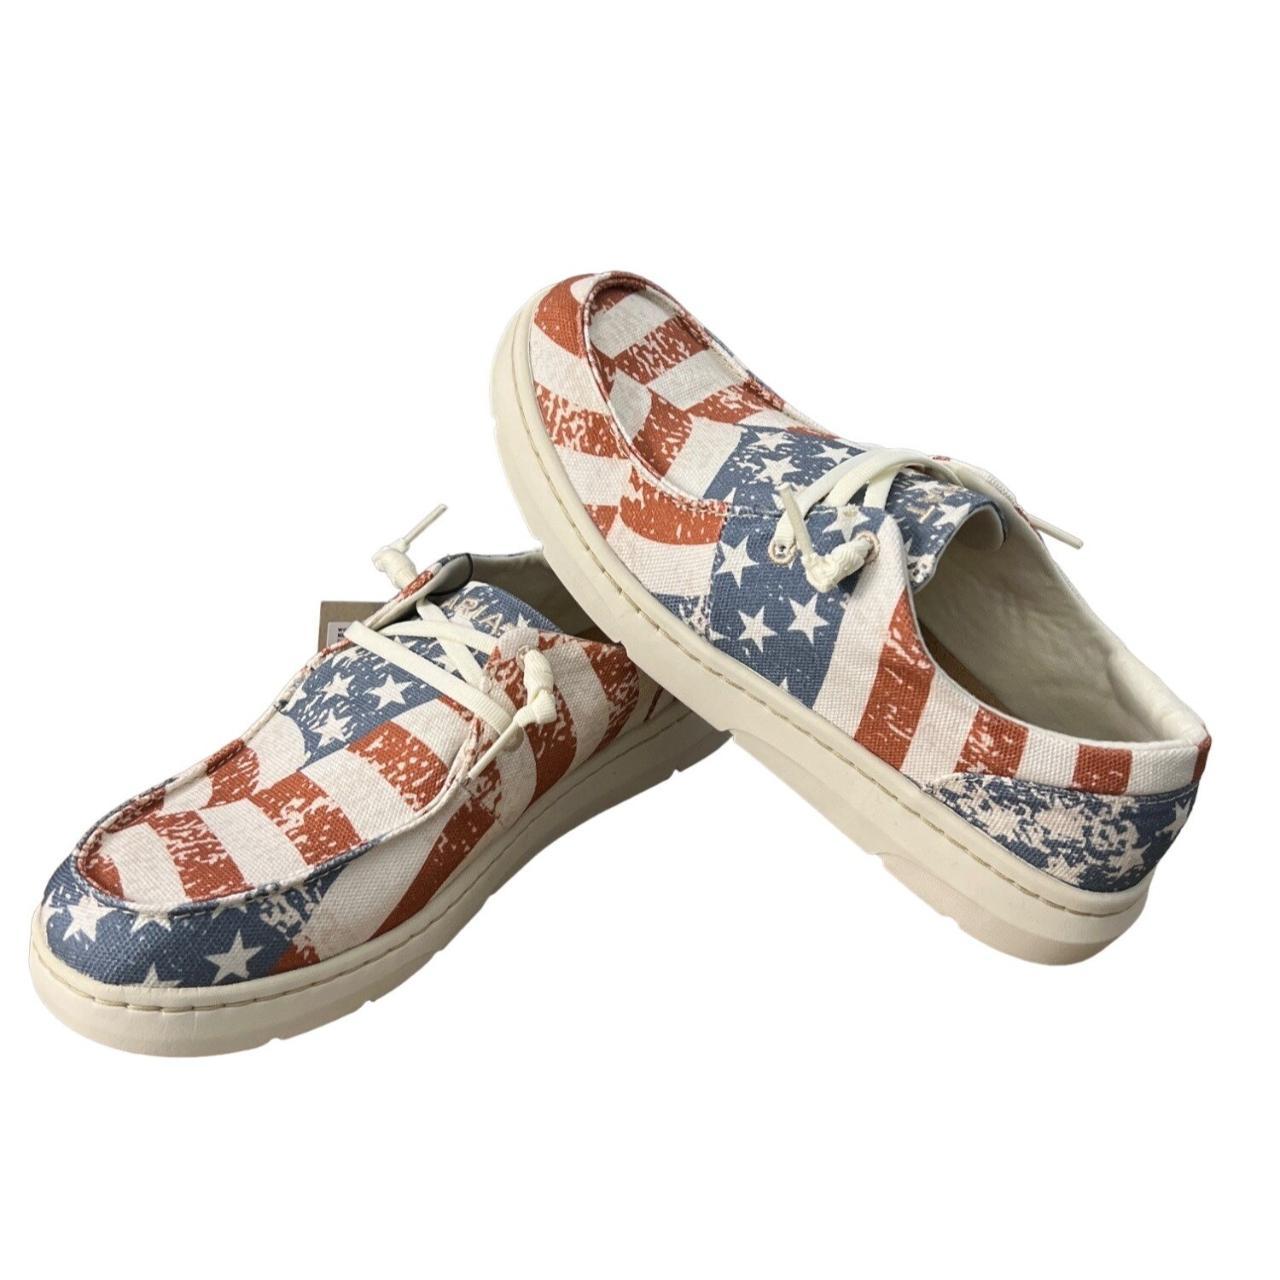 These Hilo Distressed Flag Ariat 